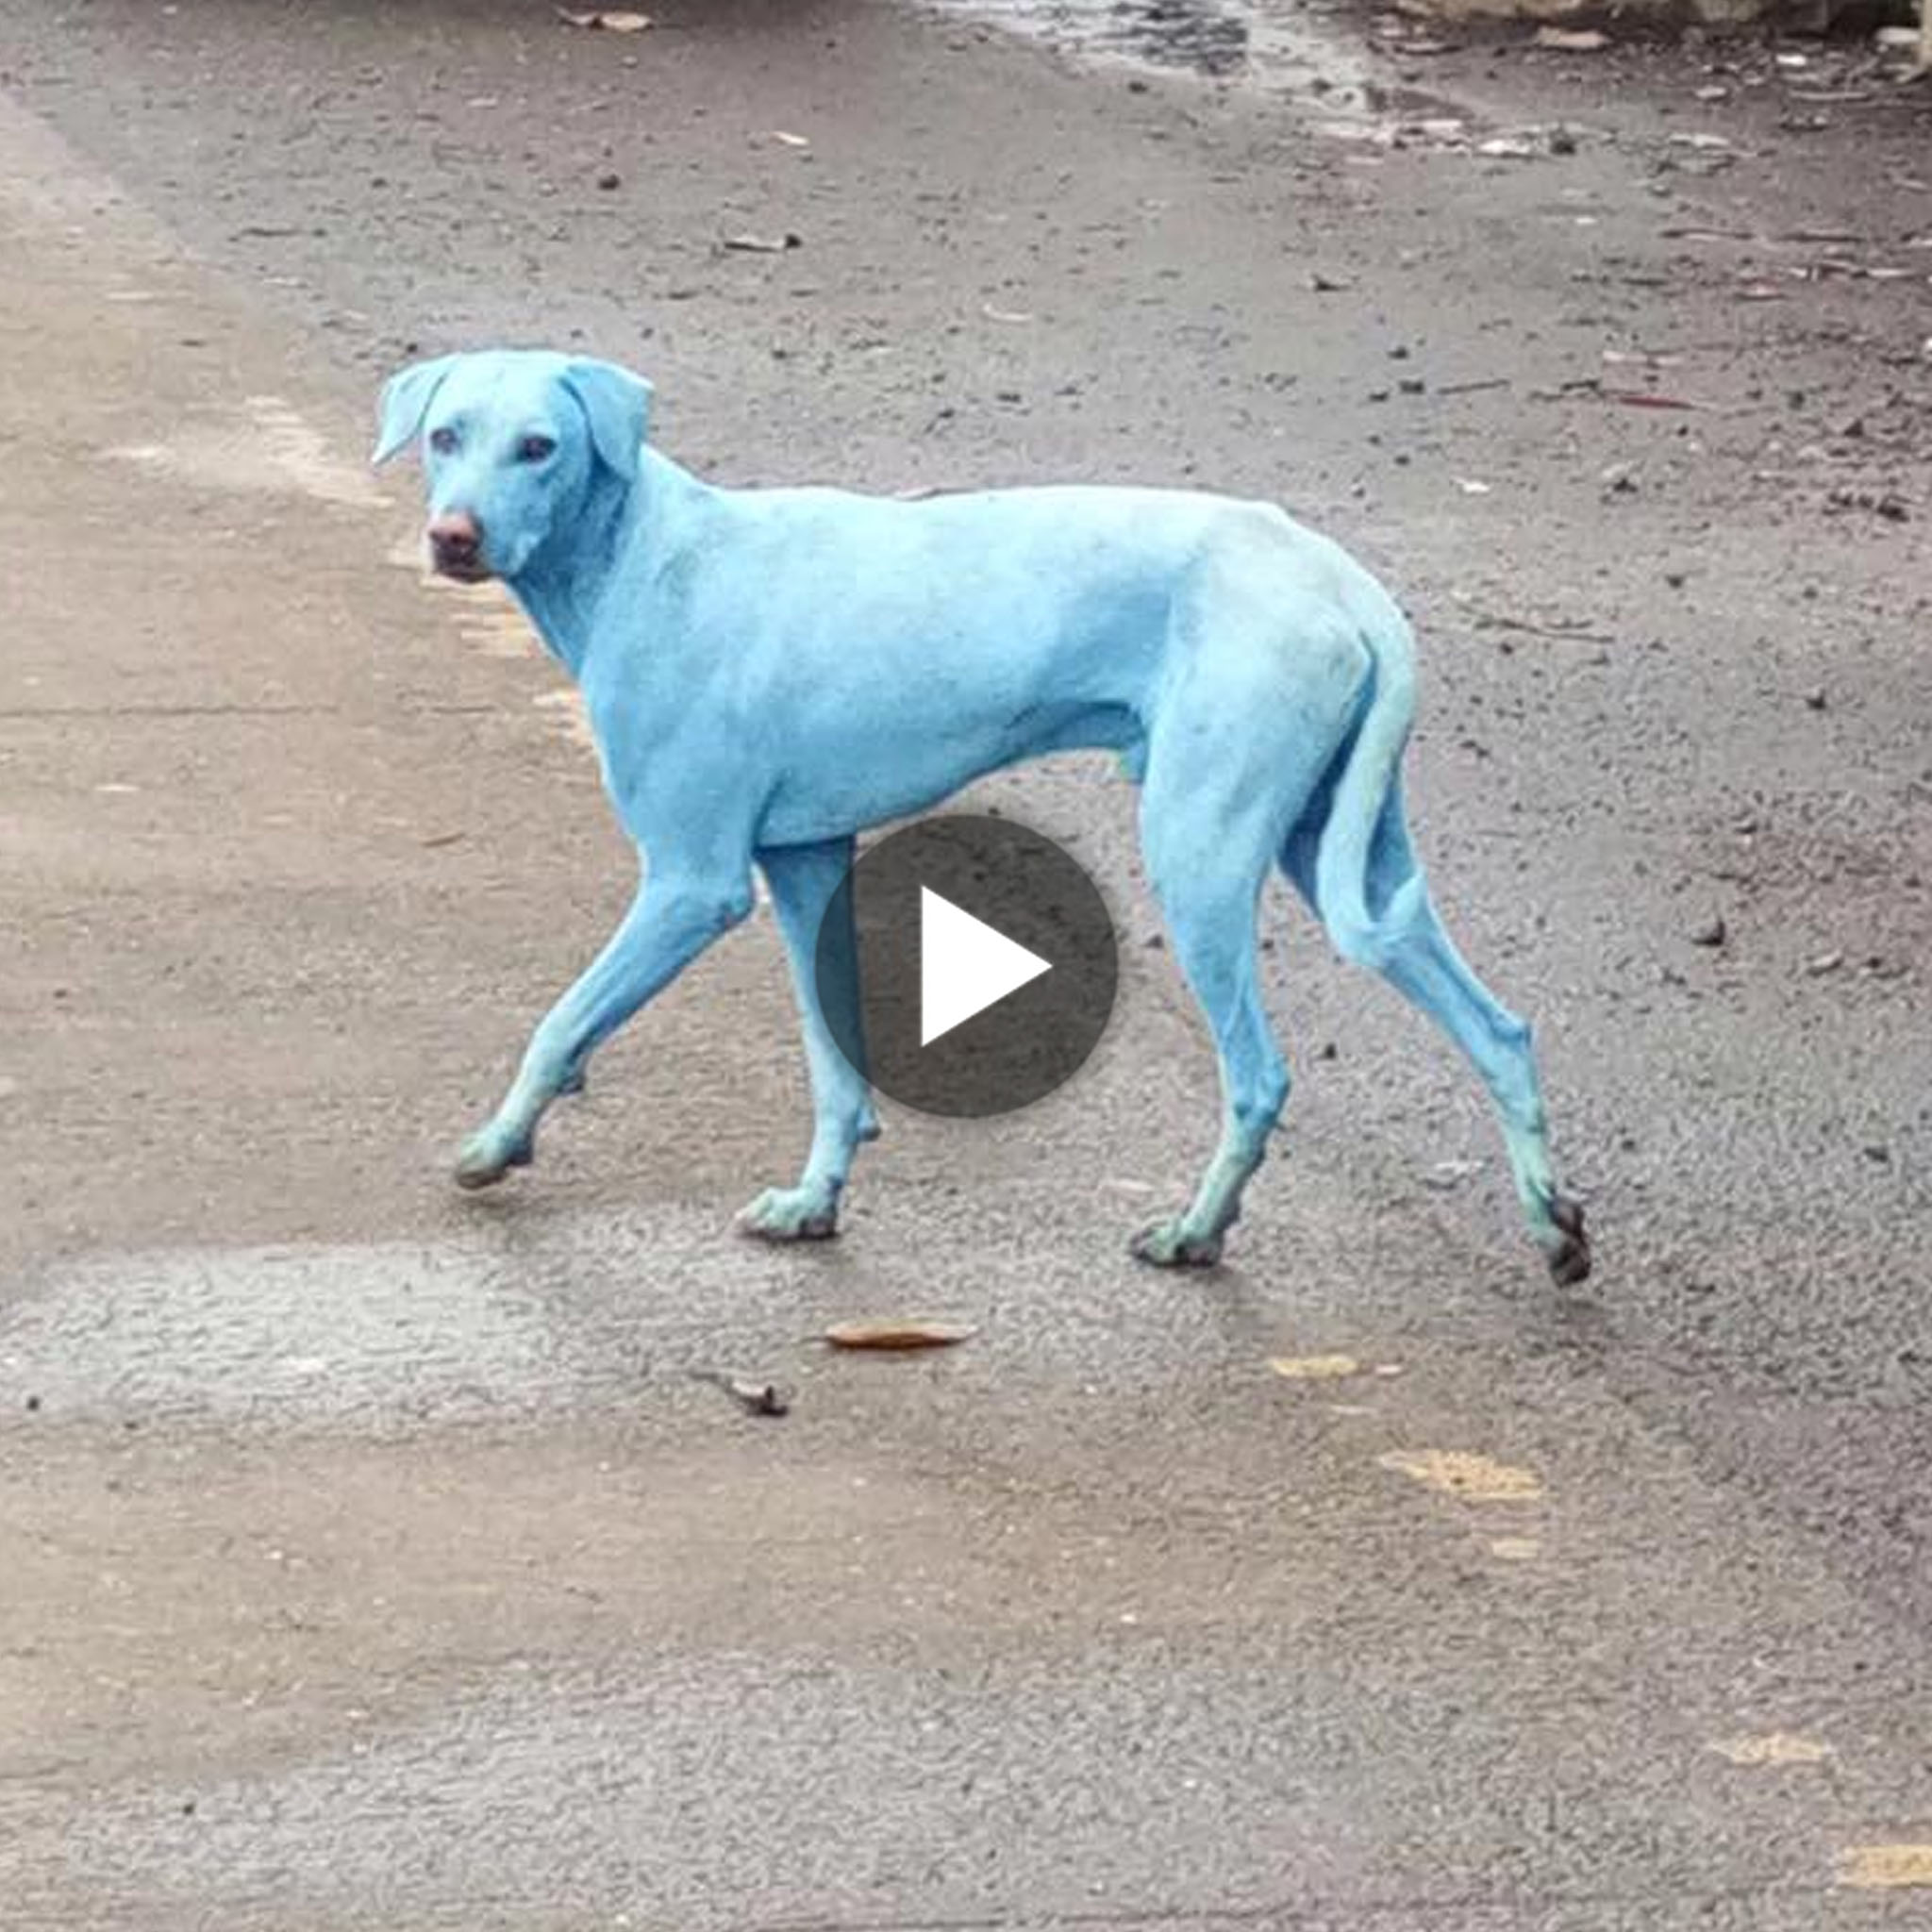 tho “Video: Wild Dog in a Pale Color in India Brings Laughter to Readers” tho